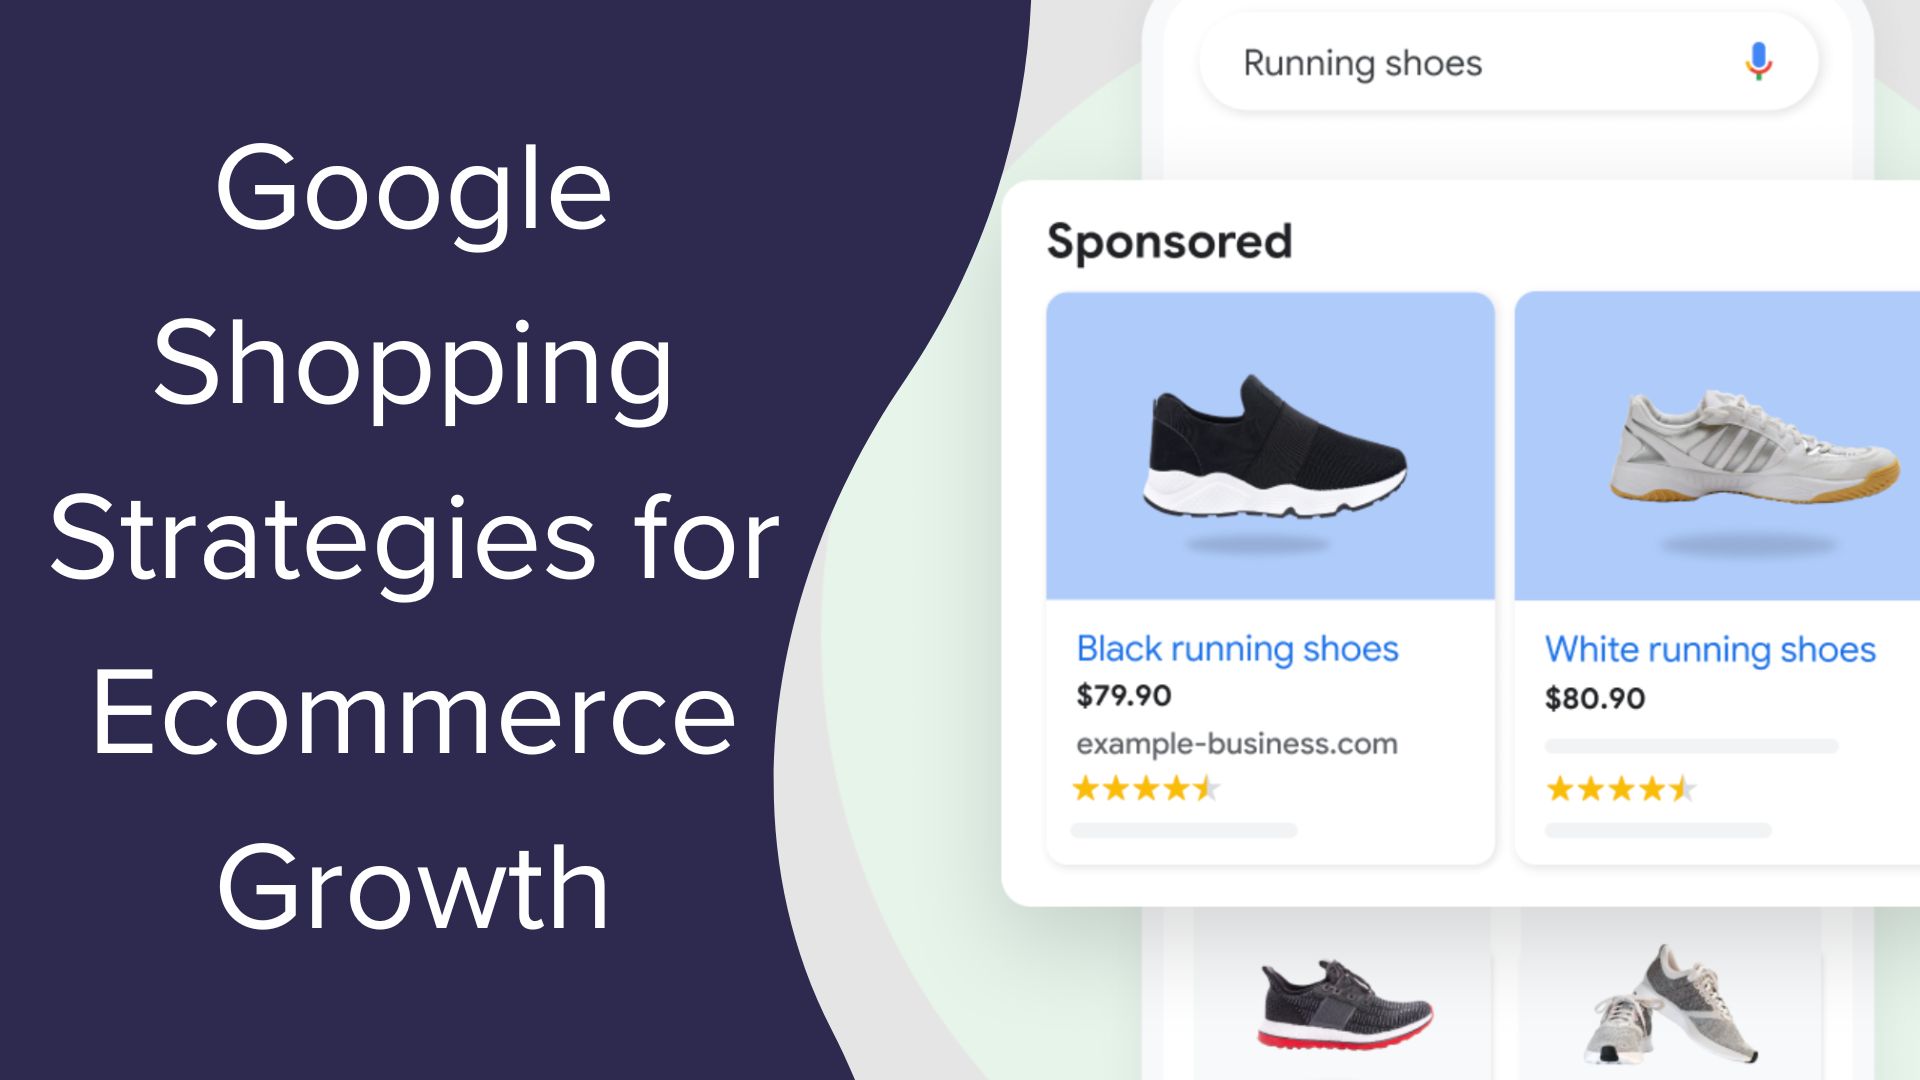 Google Shopping Strategies for Ecommerce Growth